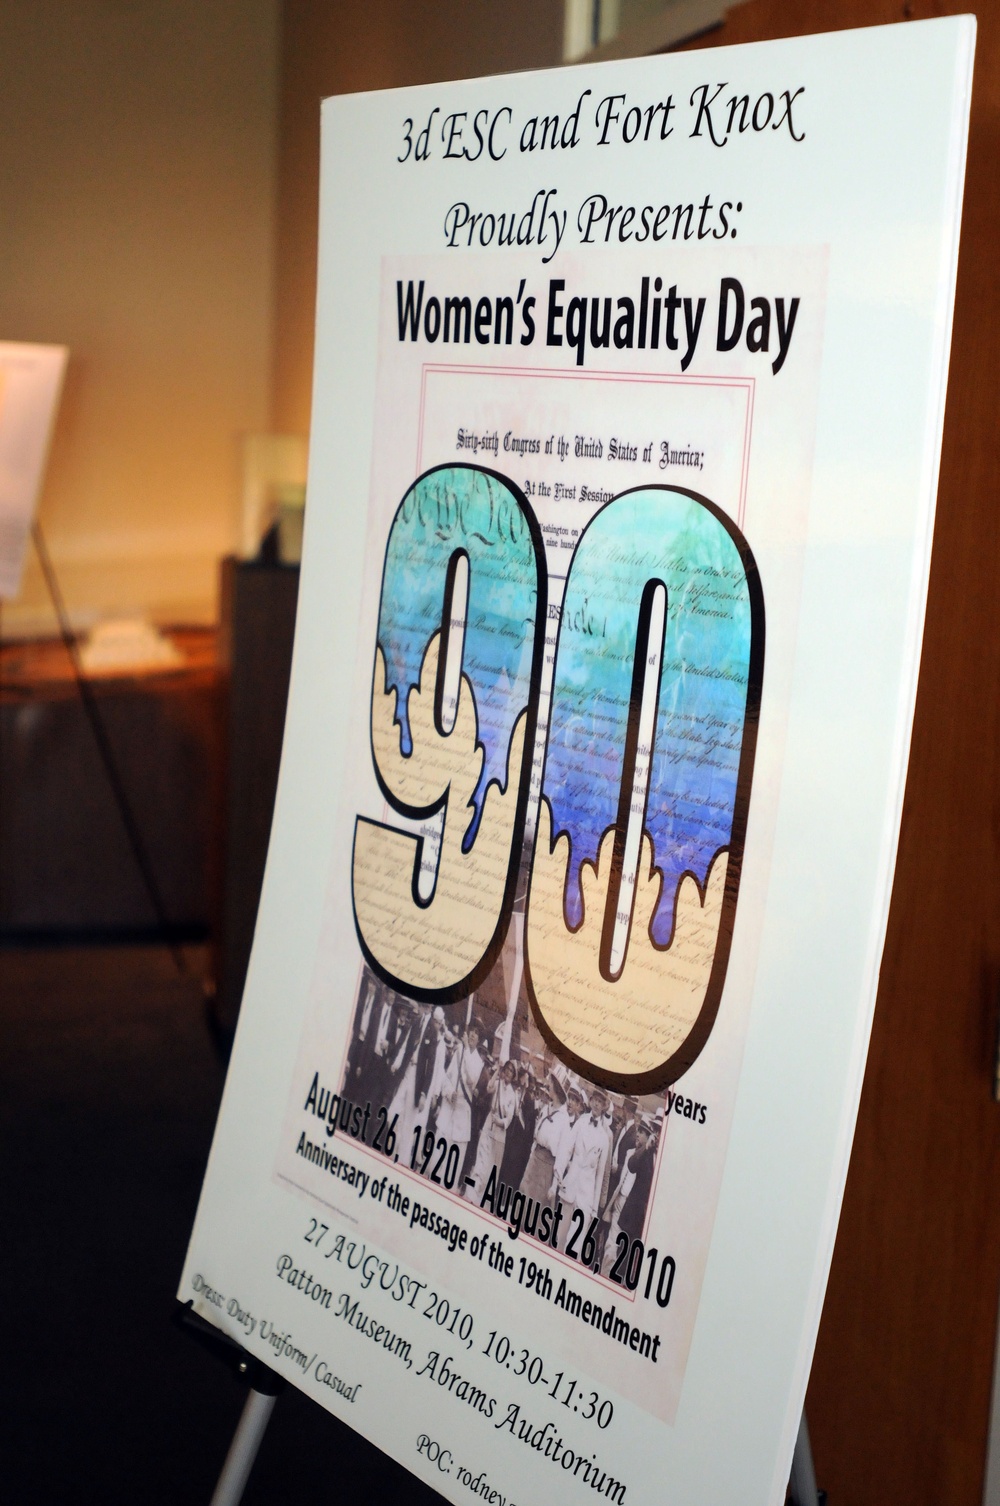 Women’s Equality Day Celebrated by Sustainers